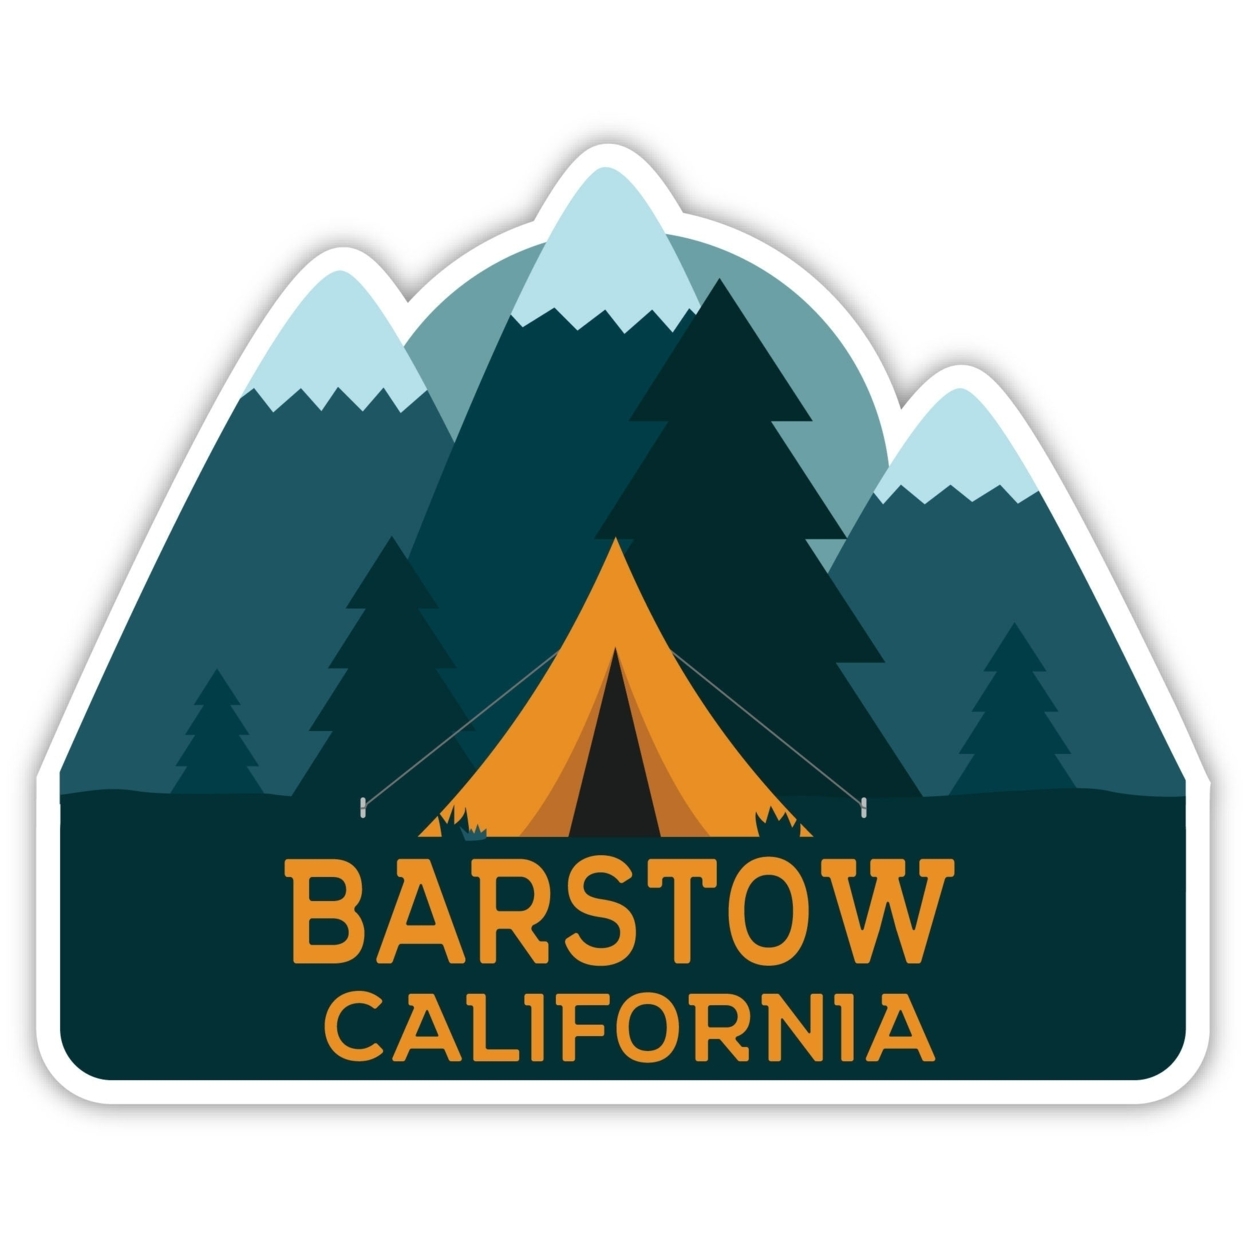 Barstow California Souvenir Decorative Stickers (Choose Theme And Size) - Single Unit, 8-Inch, Adventures Awaits